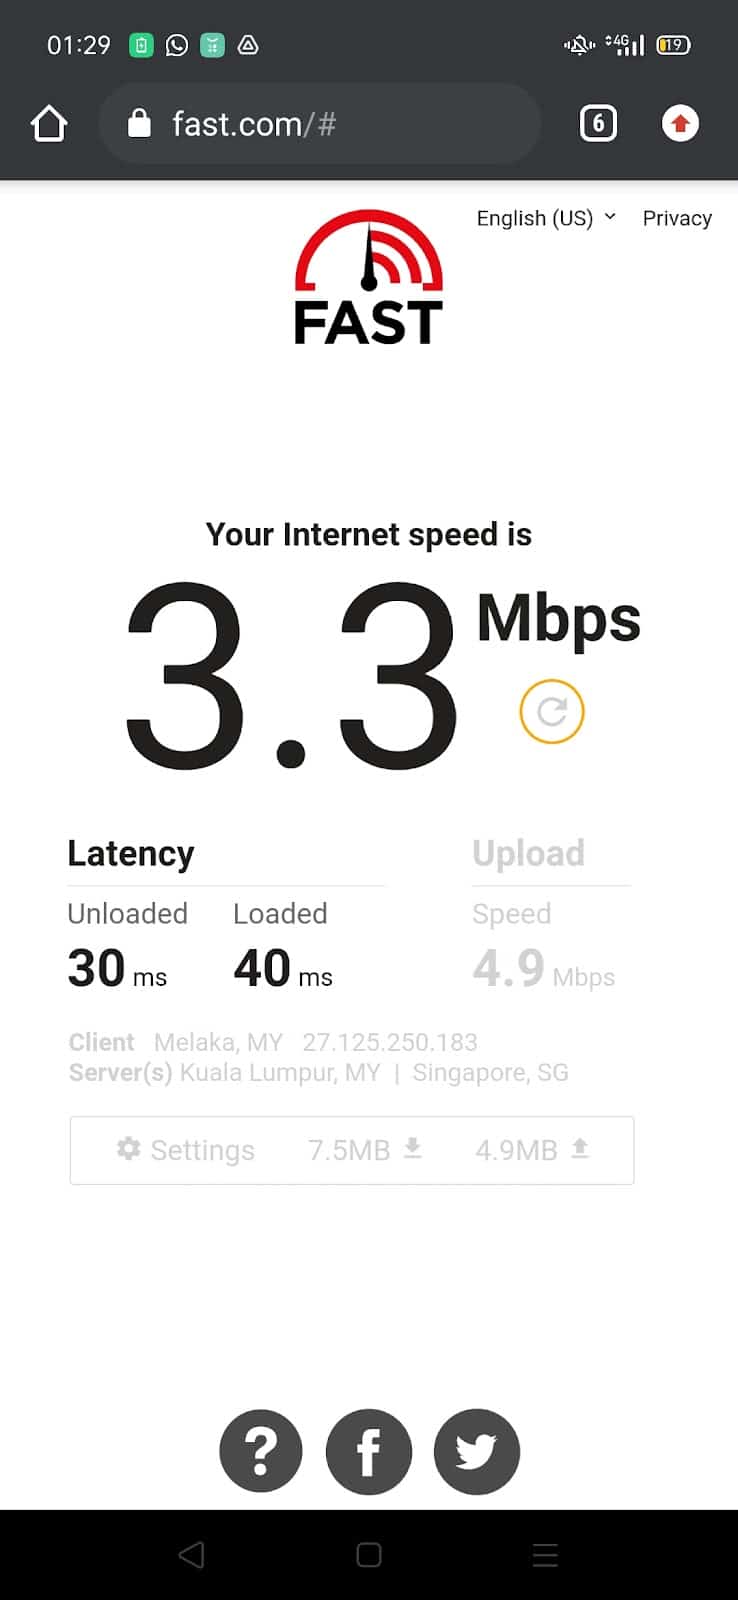 Test your internet speed on Fast.com to fix YouTube "No Internet Connection", "Please Check Your Network Connection", "You're Offline" errors